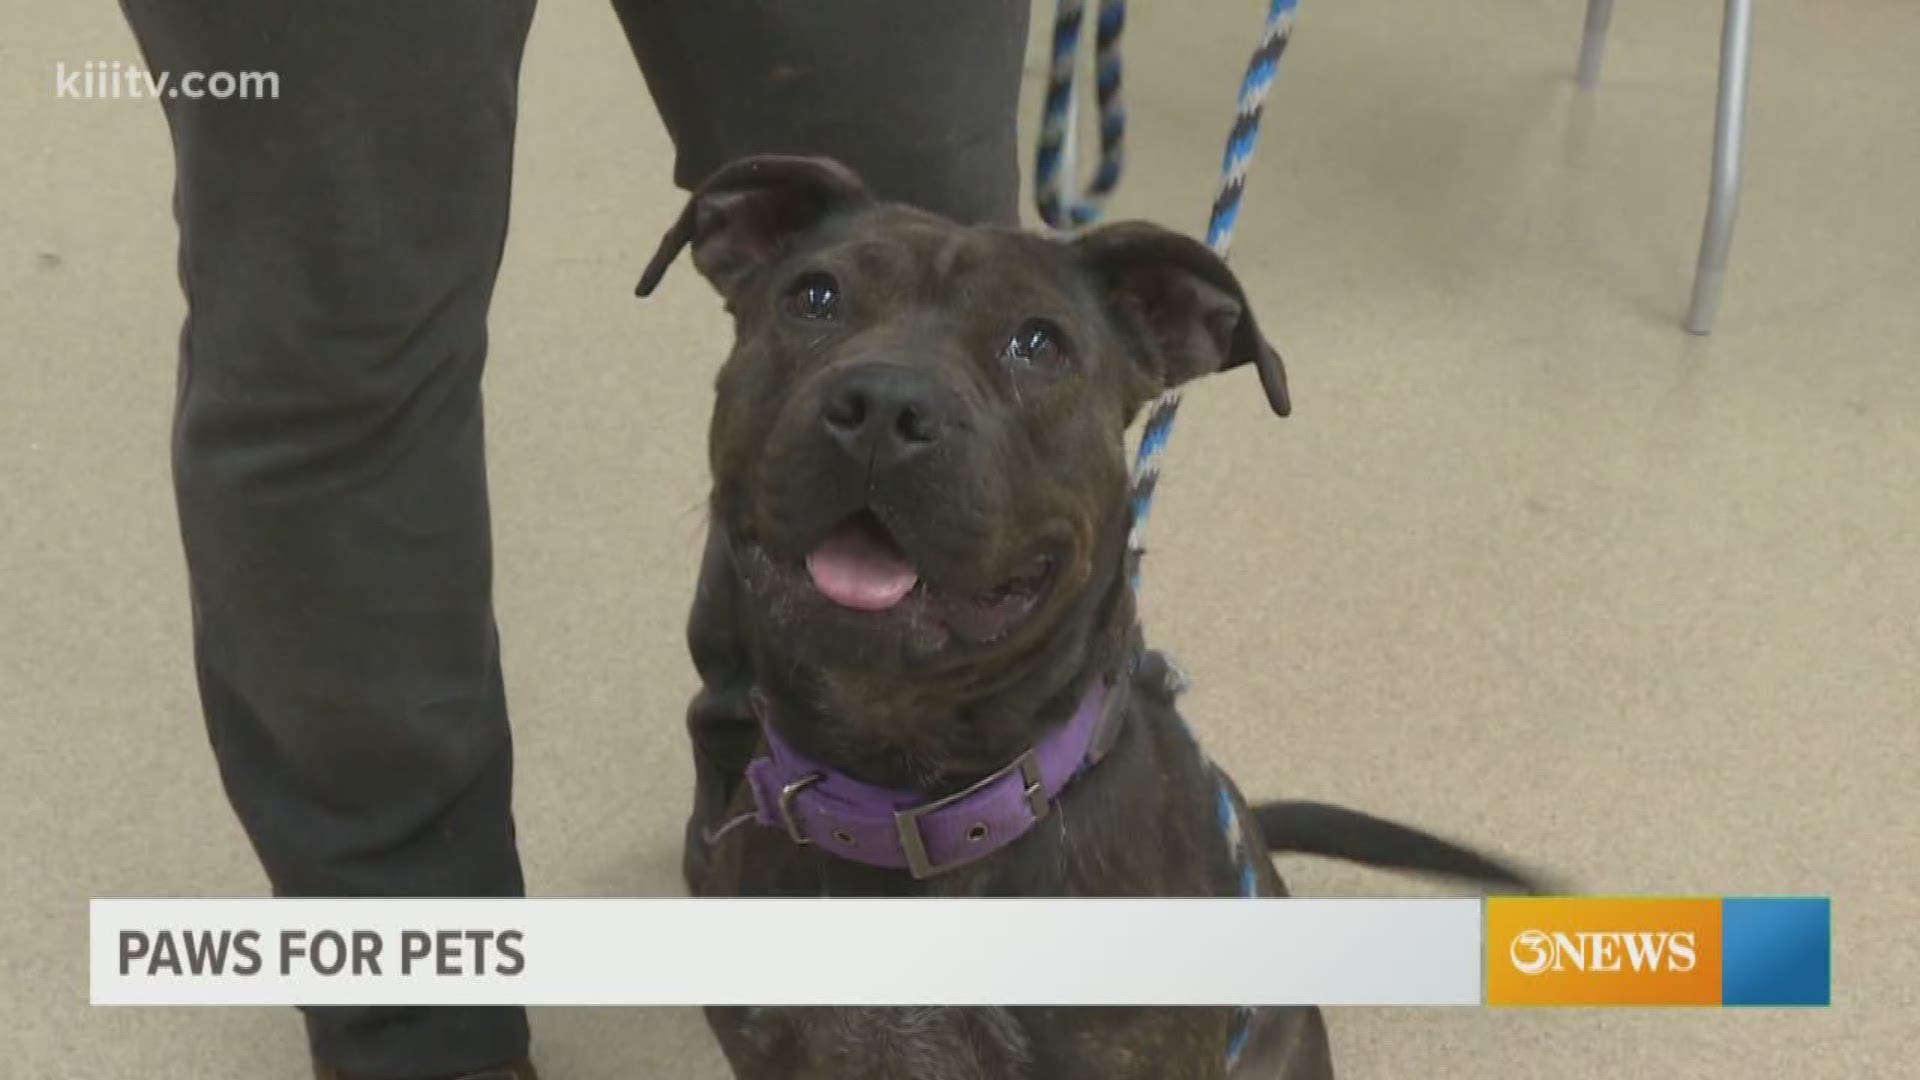 Adopt your next pet from the Gulf Coast Humane Society.